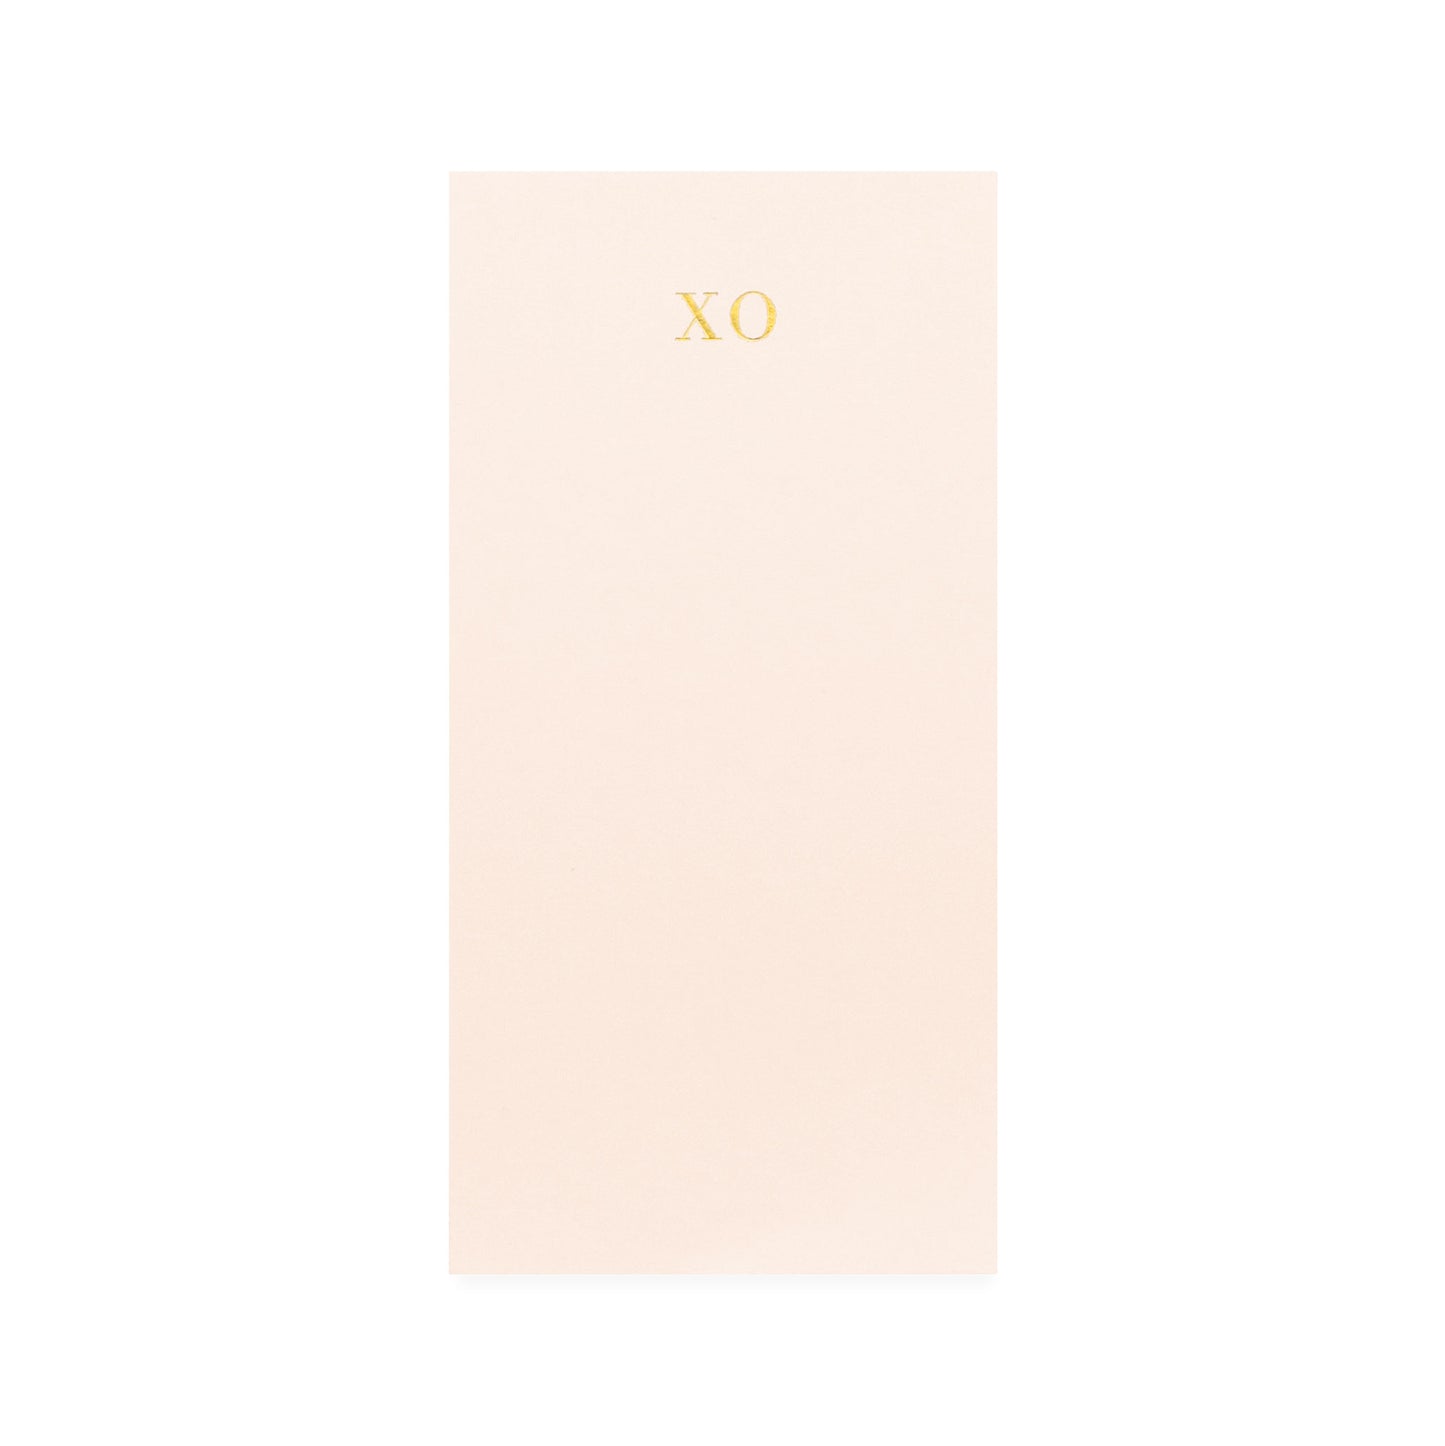 Pale Pink notepad printed with gold foil XO